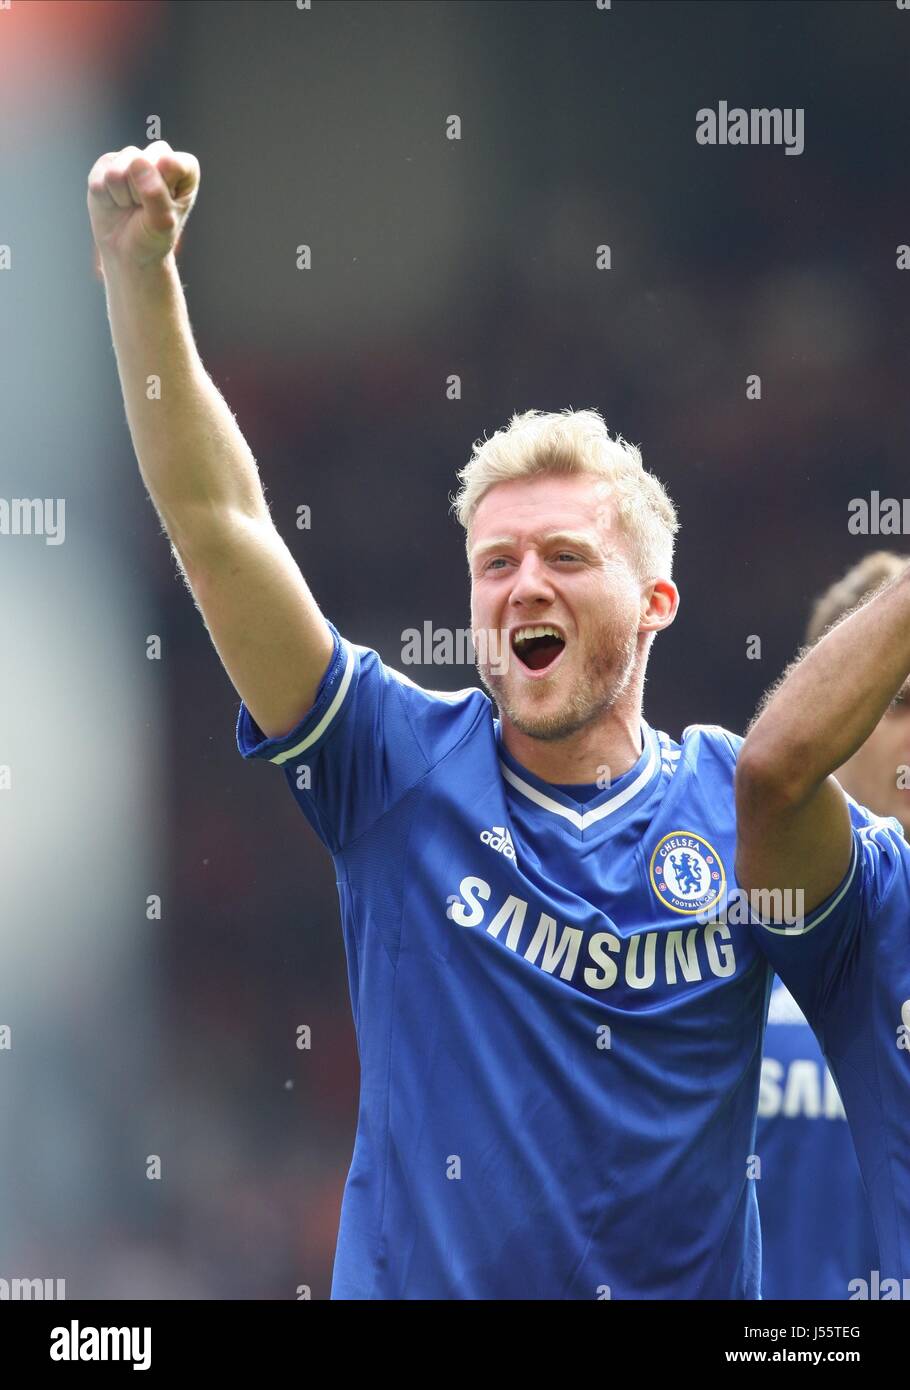 ANDRE SCHURRLE Chelsea FC Chelsea FC ANFIELD LIVERPOOL ANGLETERRE 27 Avril 2014 Banque D'Images